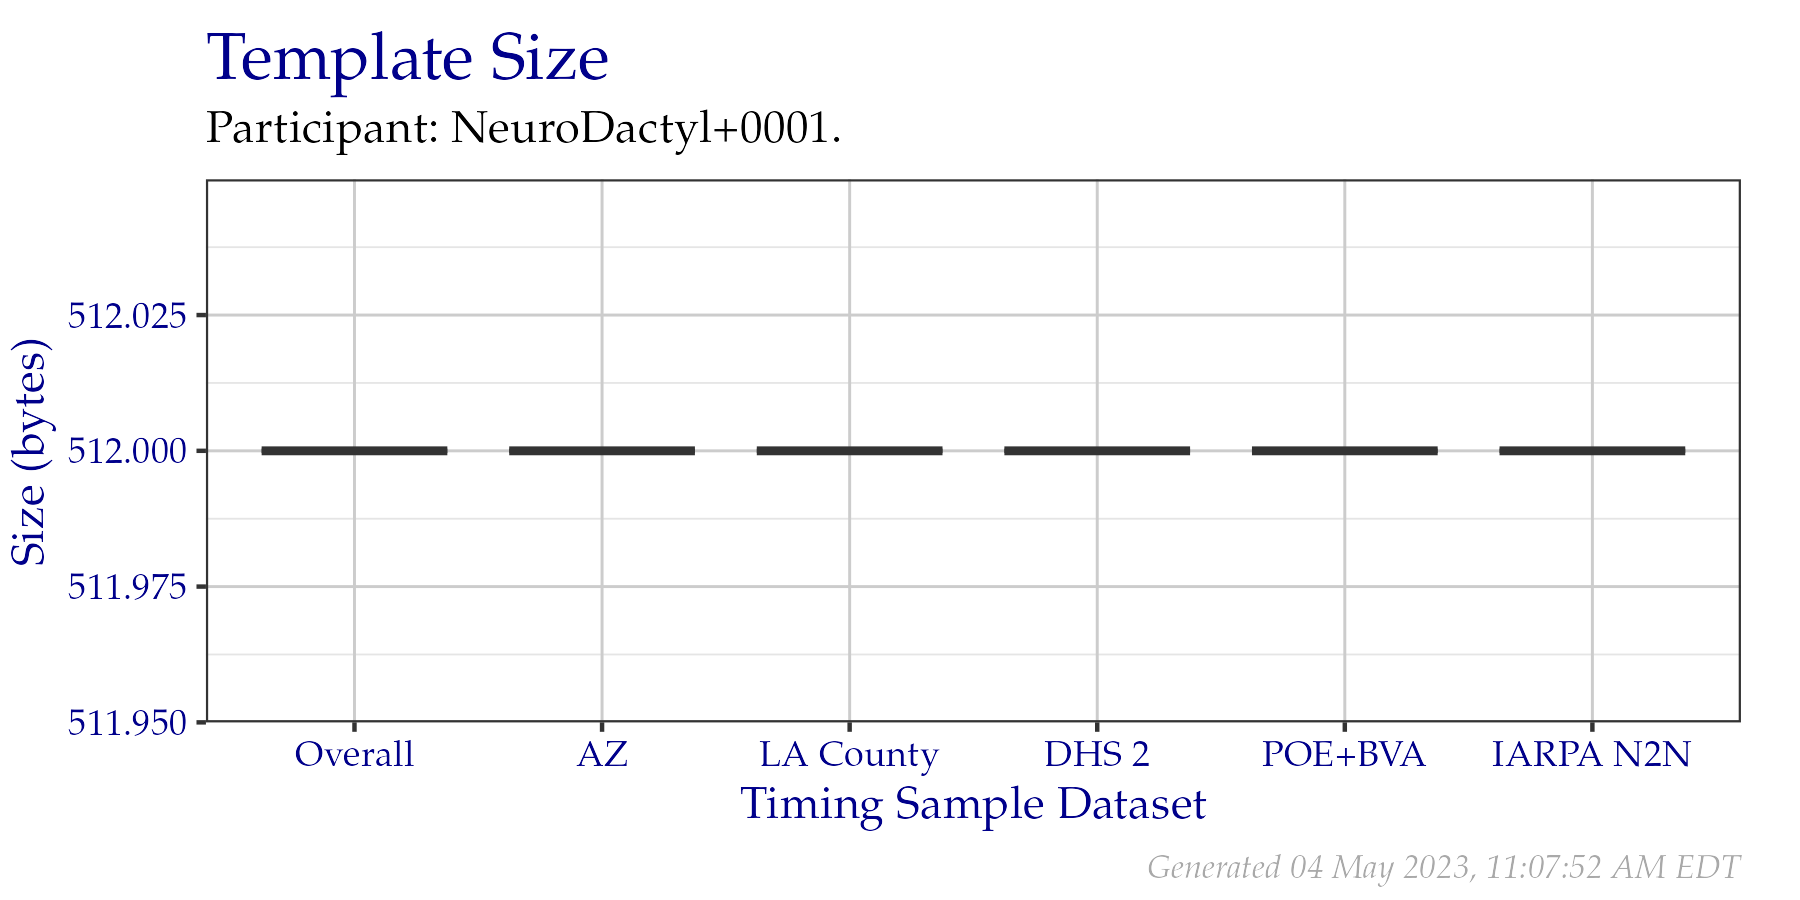 Box plots of template sizes in bytes of templates created from a fixed sample of data from the PFT III evaluation. An overall plot is shown, as well as individual plots per data origin. Tabular versions of this data are shown in Table 2.2.